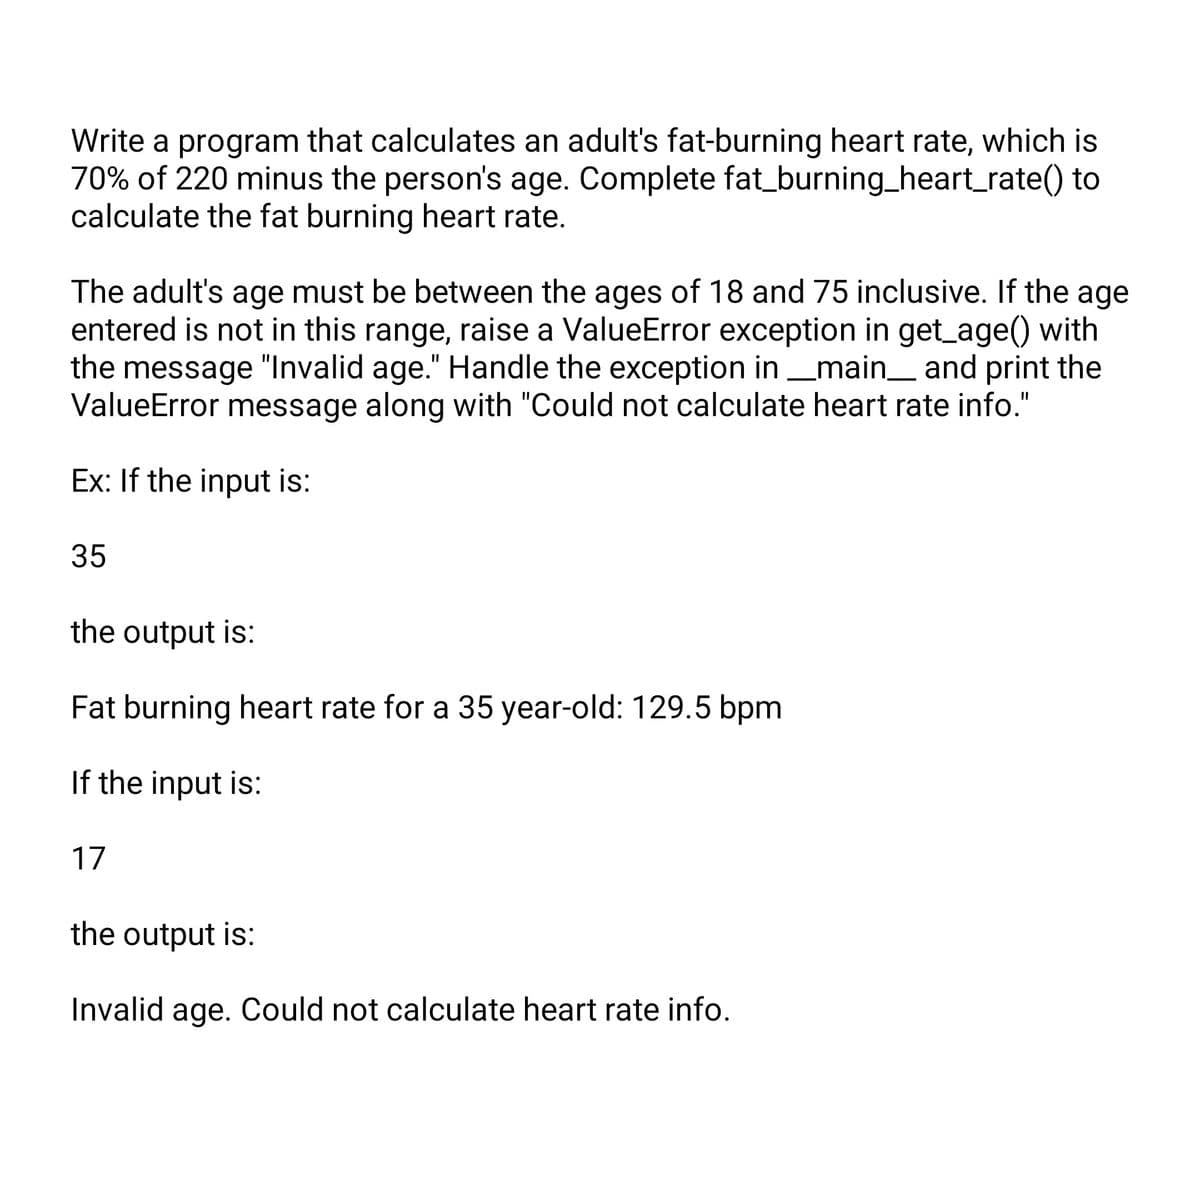 Write a program that calculates an adult's fat-burning heart rate, which is
70% of 220 minus the person's age. Complete fat_burning_heart_rate() to
calculate the fat burning heart rate.
The adult's age must be between the ages of 18 and 75 inclusive. If the age
entered is not in this range, raise a ValueError exception in get_age() with
the message "Invalid age." Handle the exception in __main__ and print the
ValueError message along with "Could not calculate heart rate info."
Ex: If the input is:
35
the output is:
Fat burning heart rate for a 35 year-old: 129.5 bpm
If the input is:
17
the output is:
Invalid age. Could not calculate heart rate info.